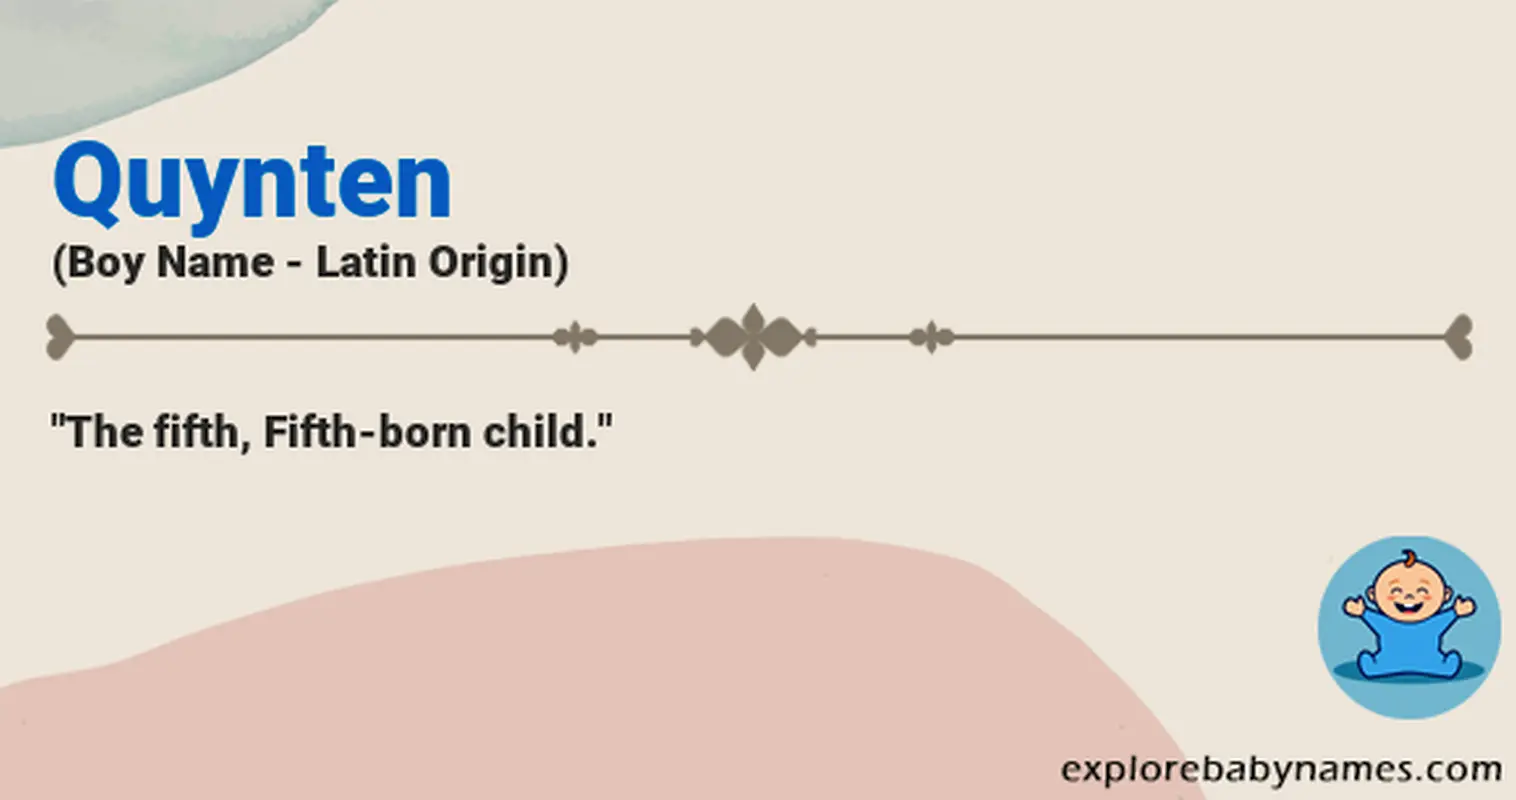 Meaning of Quynten